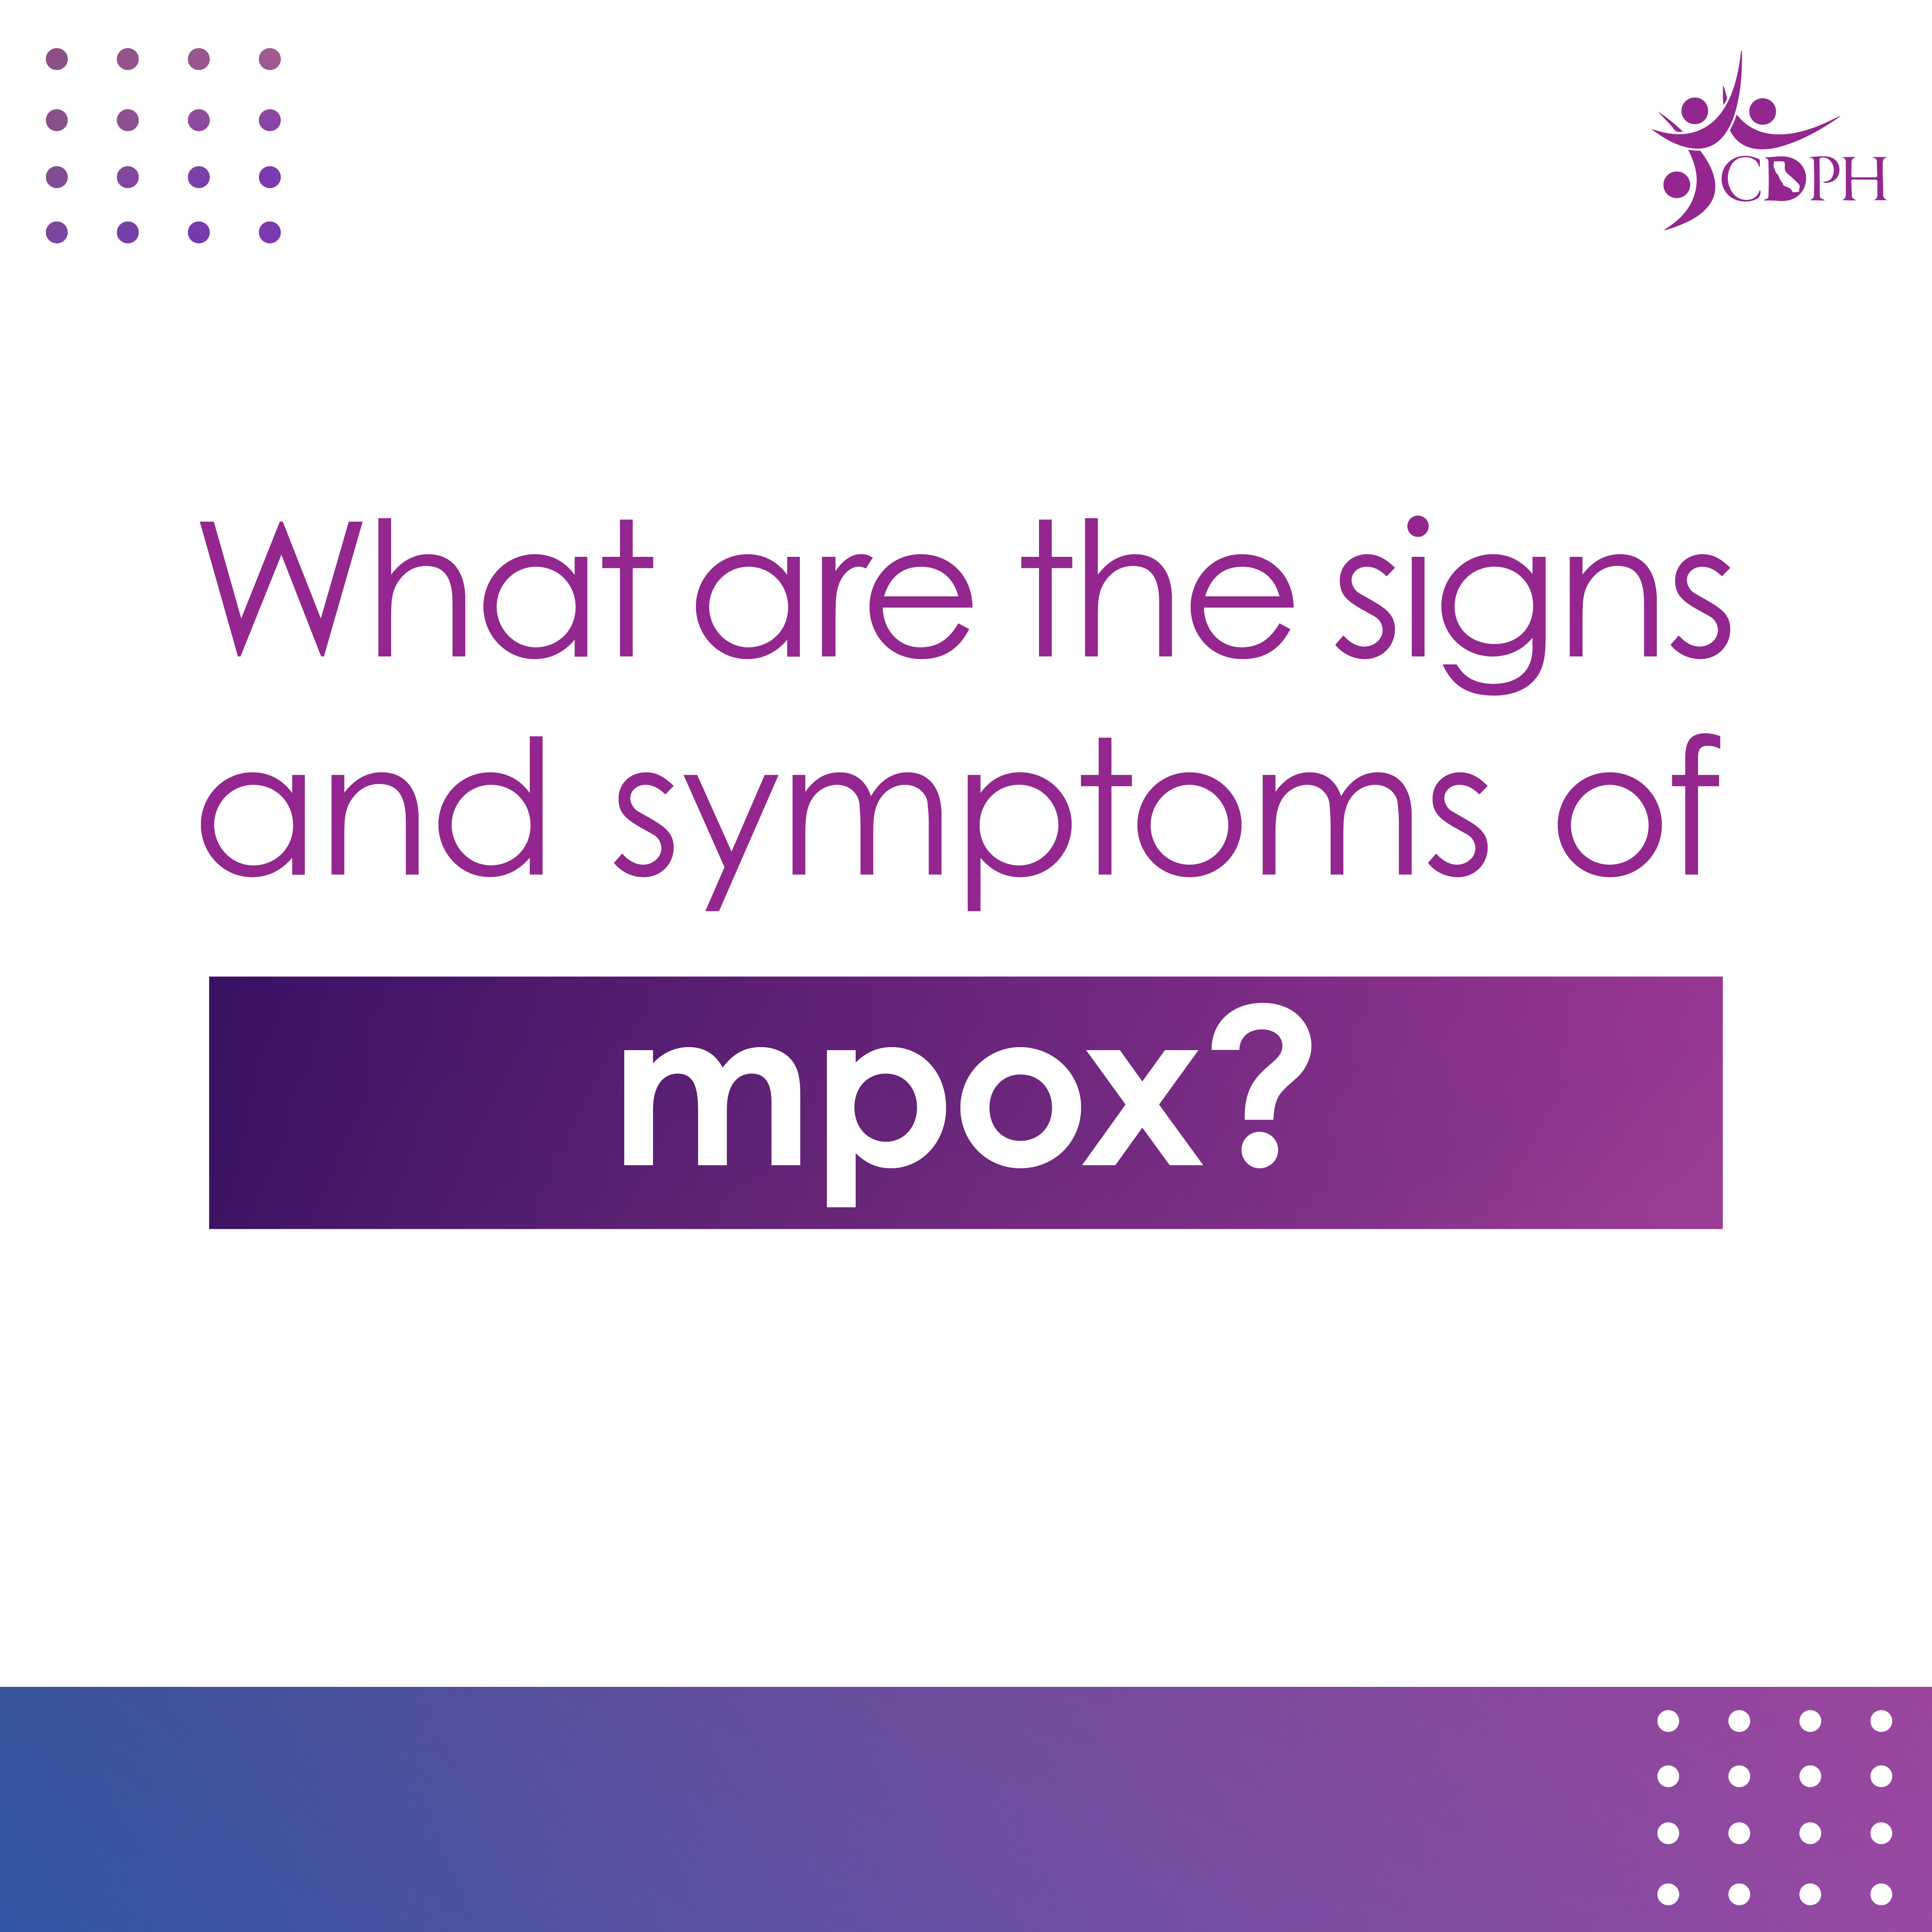 What are the signs and symptoms of monkeypox?